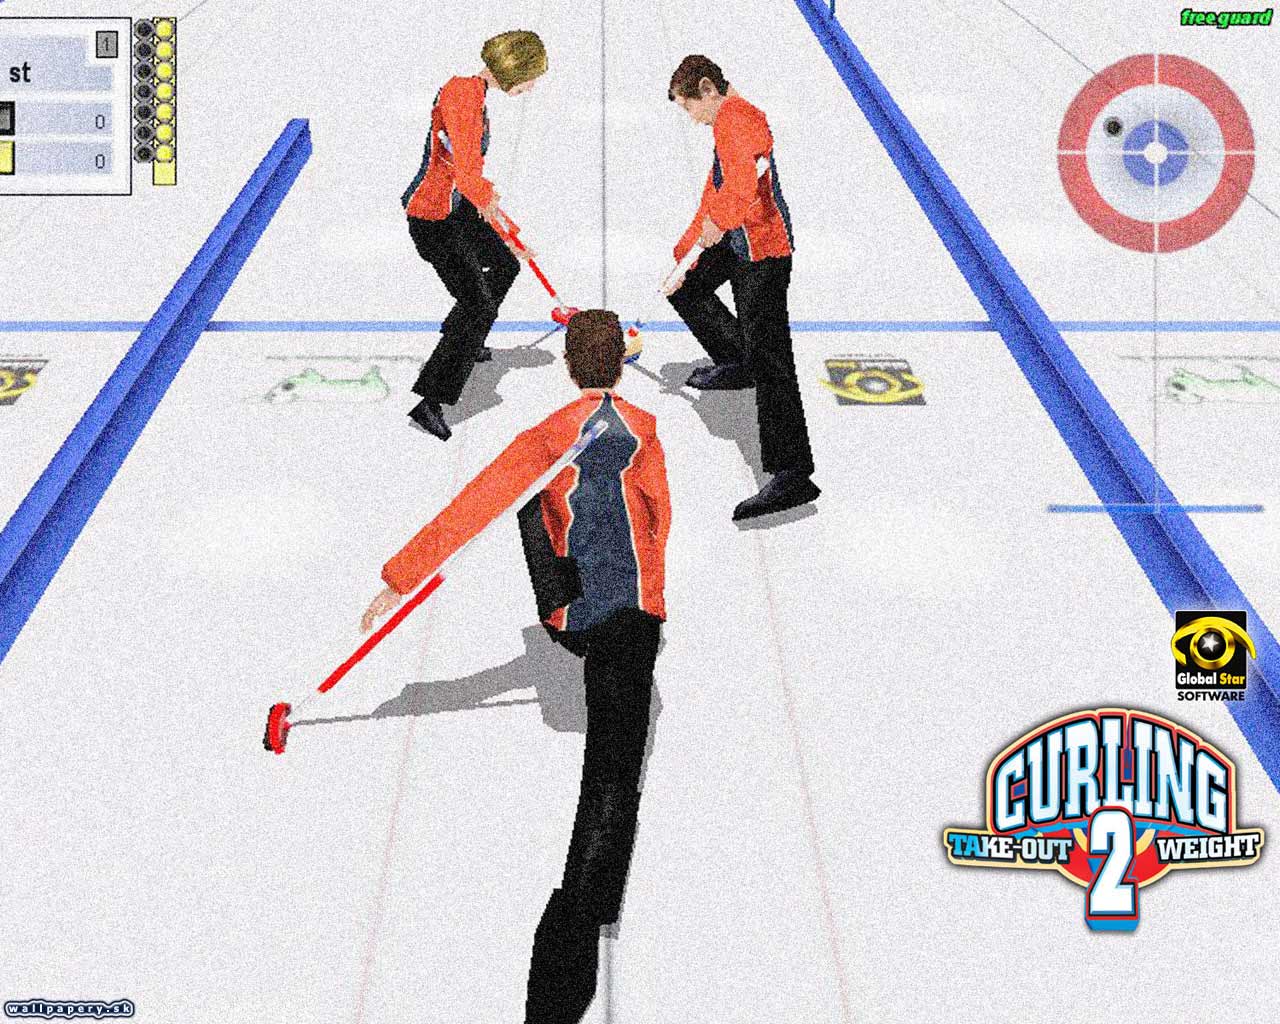 Take Out Weight Curling 2 - wallpaper 2